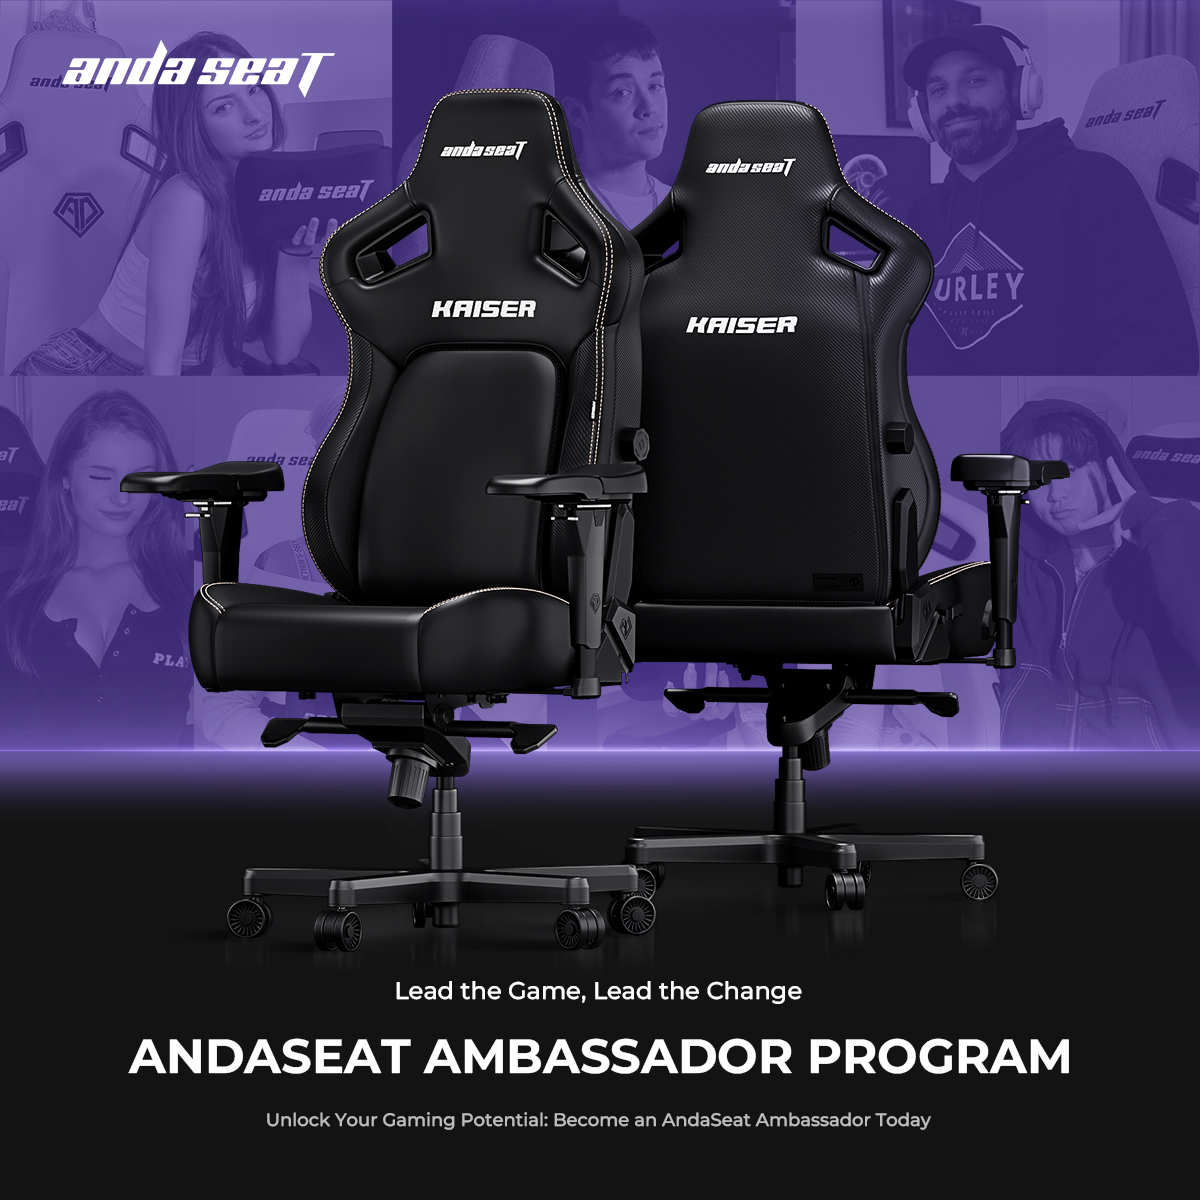 Calling all gaming enthusiasts and content creators! 🎮AndaSeat Ambassador Wanted🎮 If you're passionate about gaming and want to be the first to experience our brand new products, we want YOU! Apply Now: shorturl.at/lBFGZ #kaiser4 #andaseat #homeandaseat #fyp